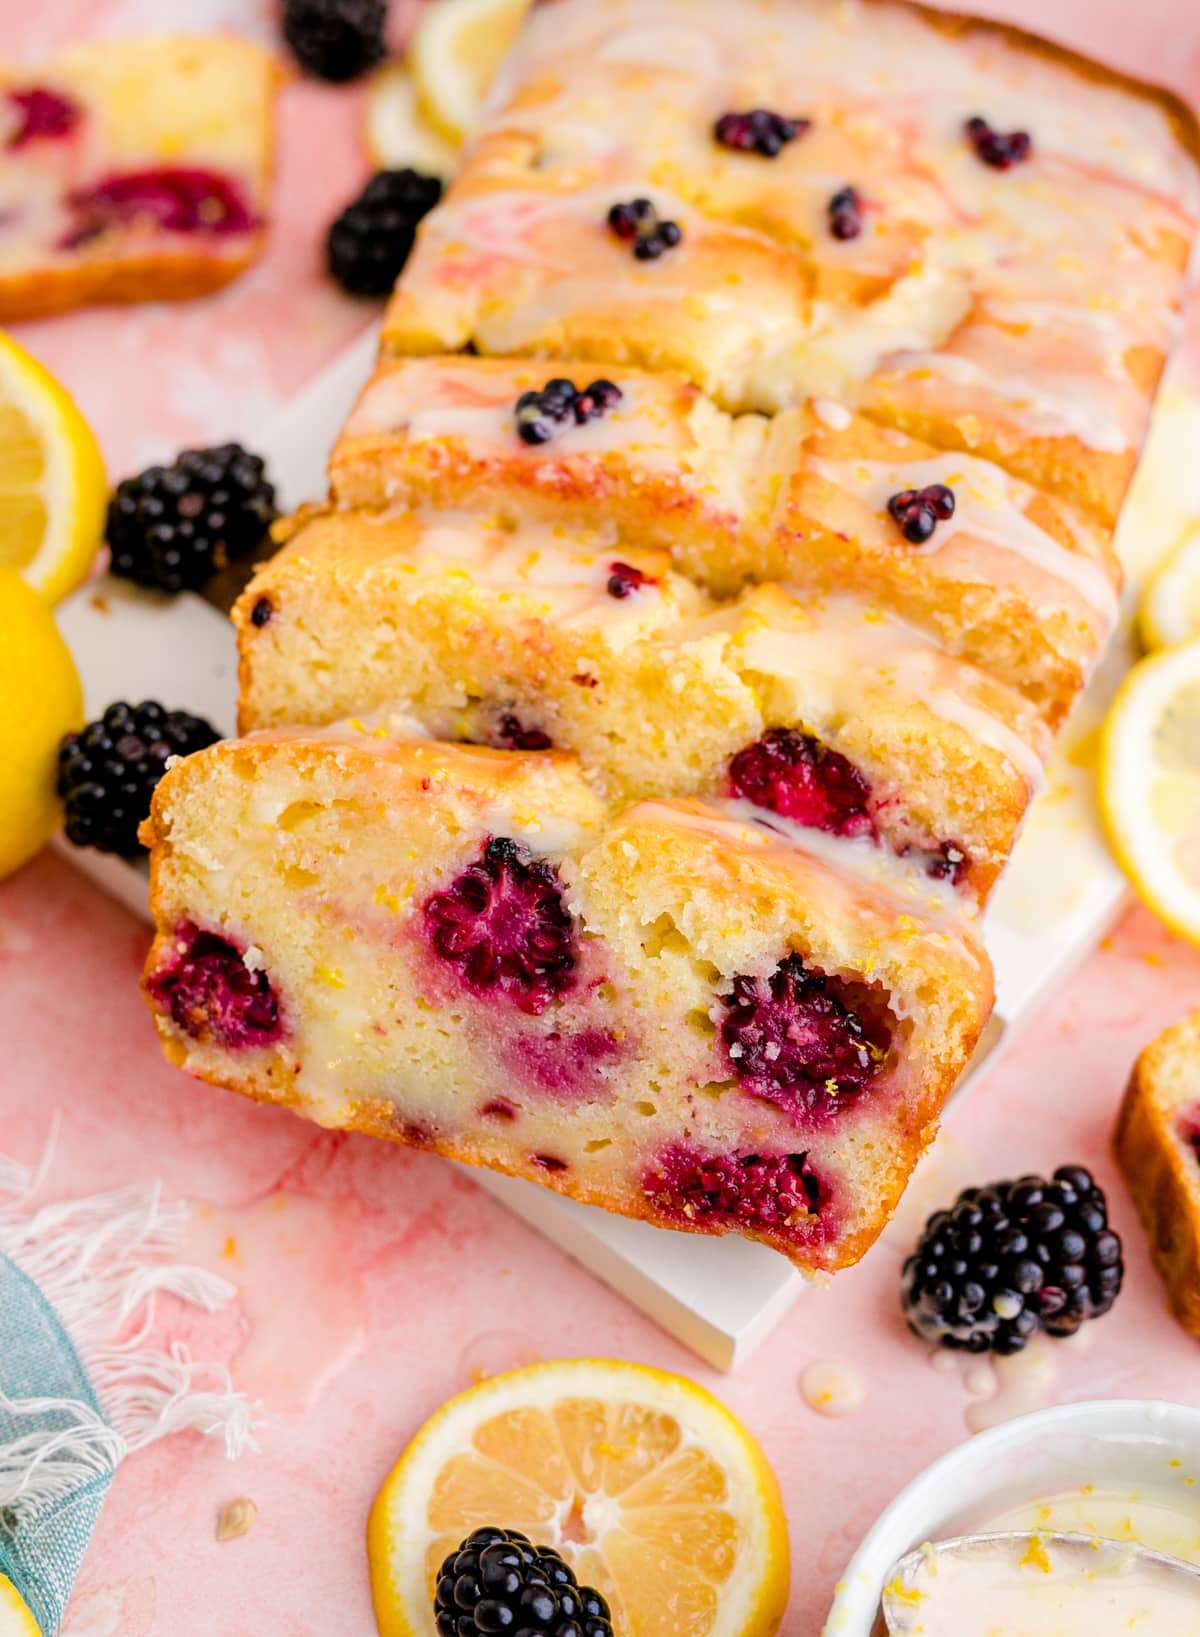 mouth-watering slices of lemon blackberry bread showing the inside of the loaf.